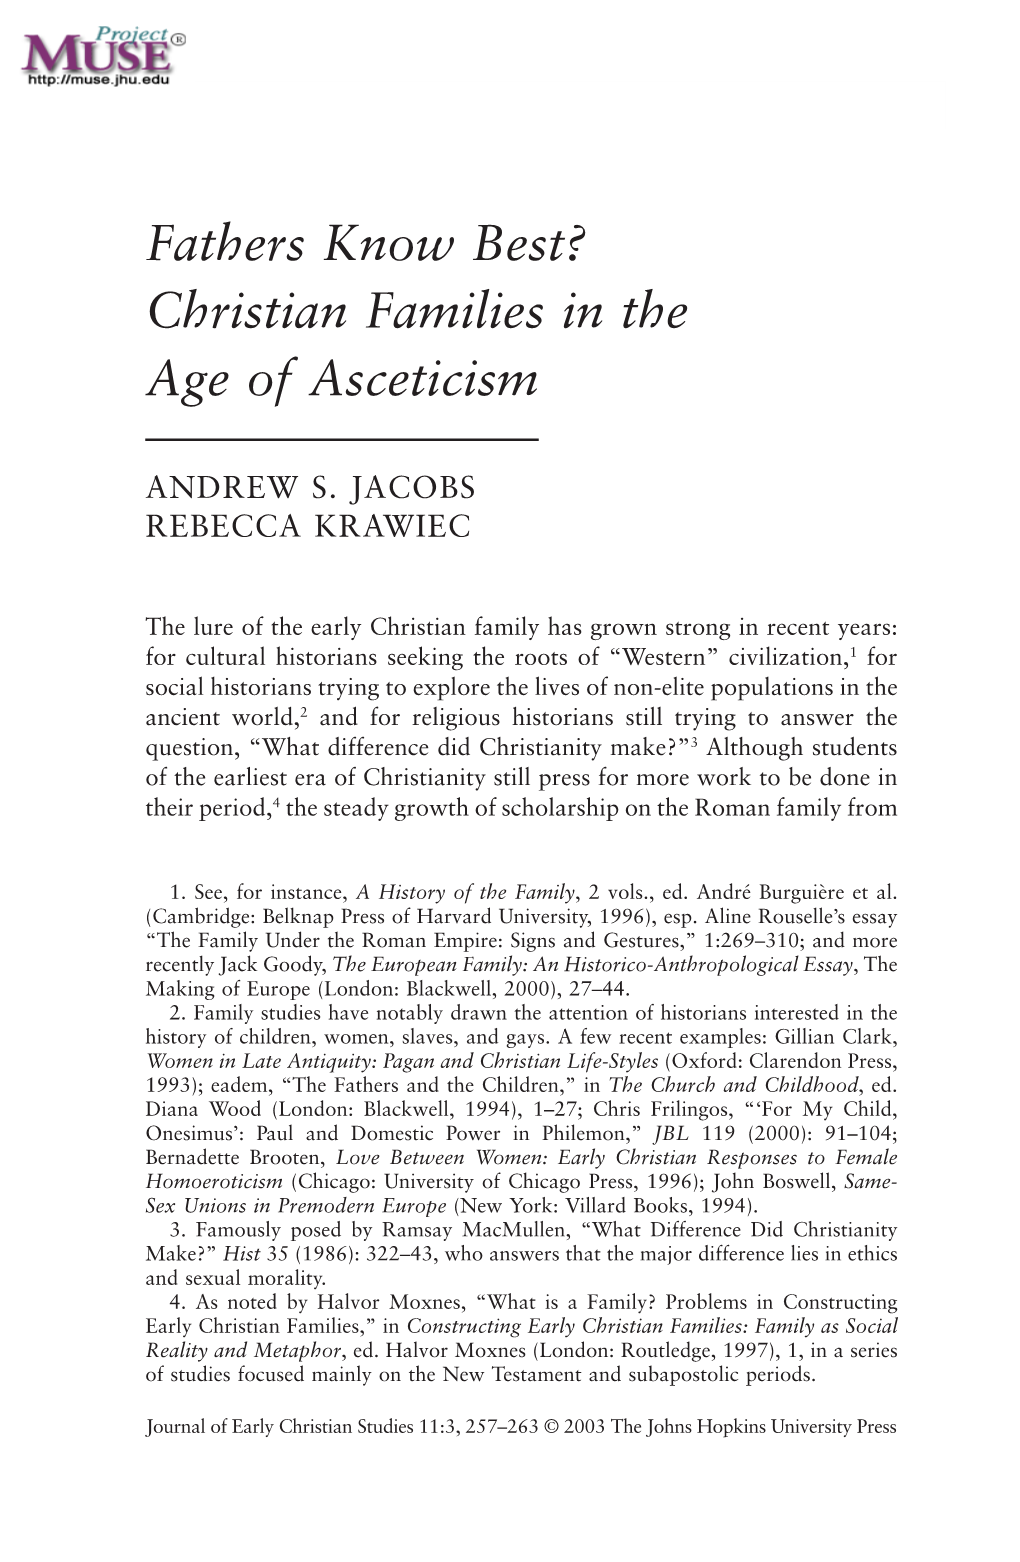 Fathers Know Best? Christian Families in the Age of Asceticism